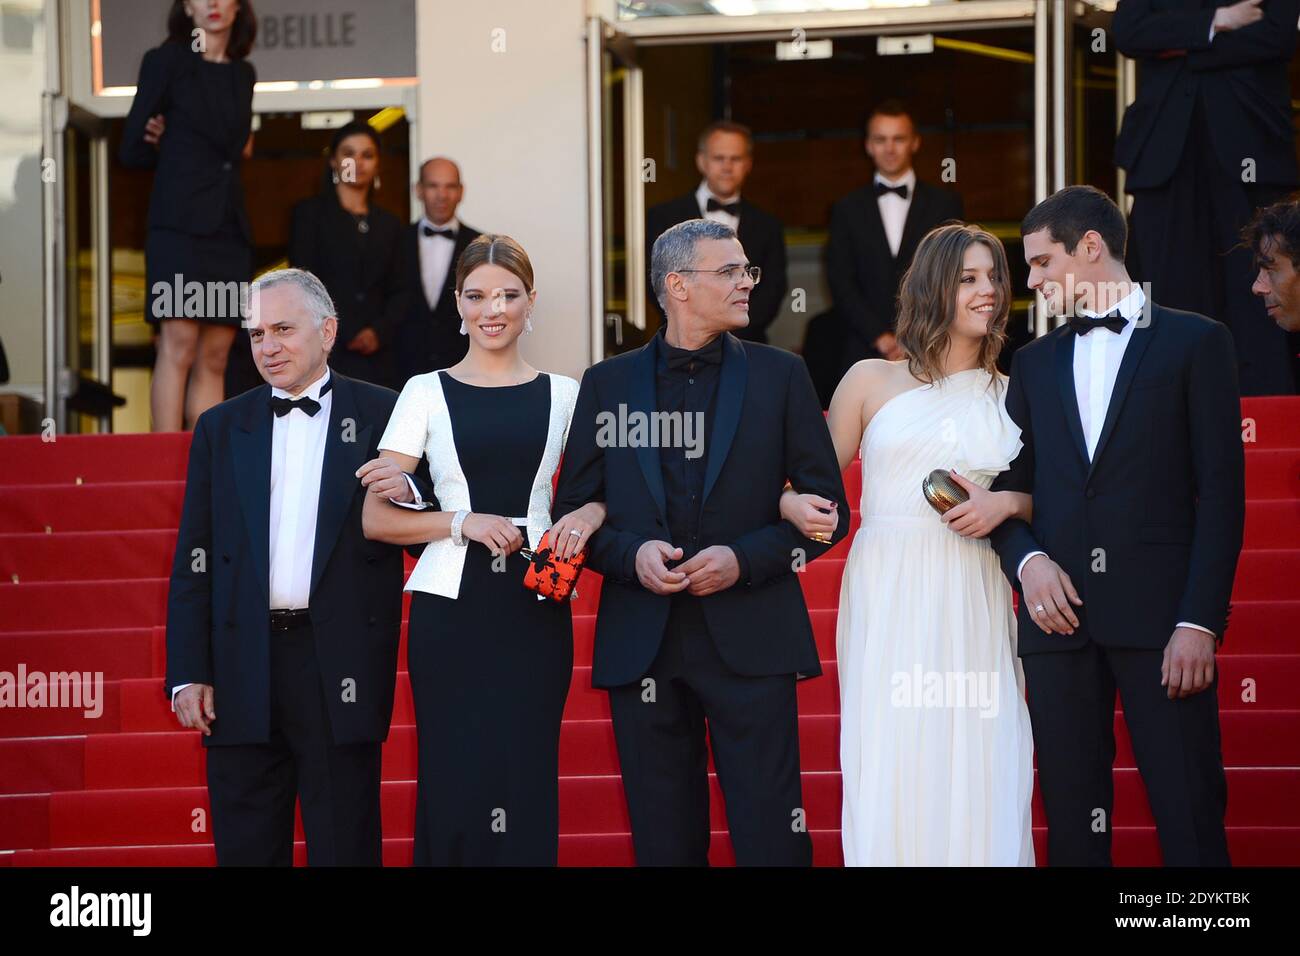 Producer Brahim Chioua, actress Lea Seydoux, director Abdellatif Kechiche, actors Adele Exarchopoulos and Jeremie Laheurte arriving for Zulu screening and closing ceremony held at the Palais des Festivals in Cannes, France on May 26, 2013, as part of the 66th Cannes Film Festival. Photo by Nicolas Briquet/ABACAPRESS.COM Stock Photo